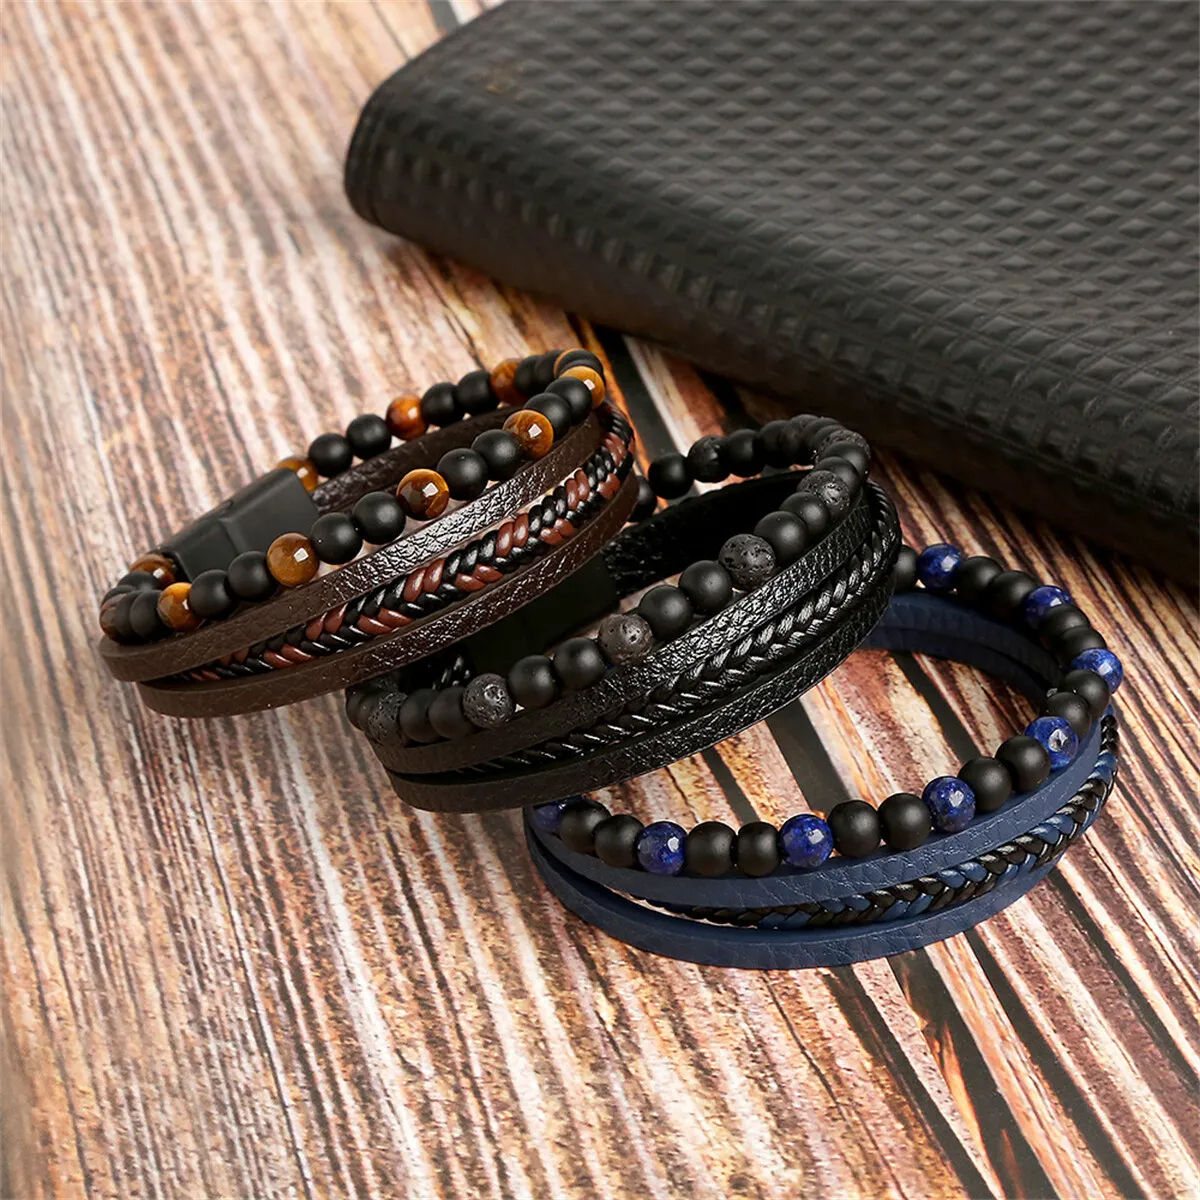 Men's leather bracelets, accessories play a pivotal role in defining and refining one's personal style. Among these accessories